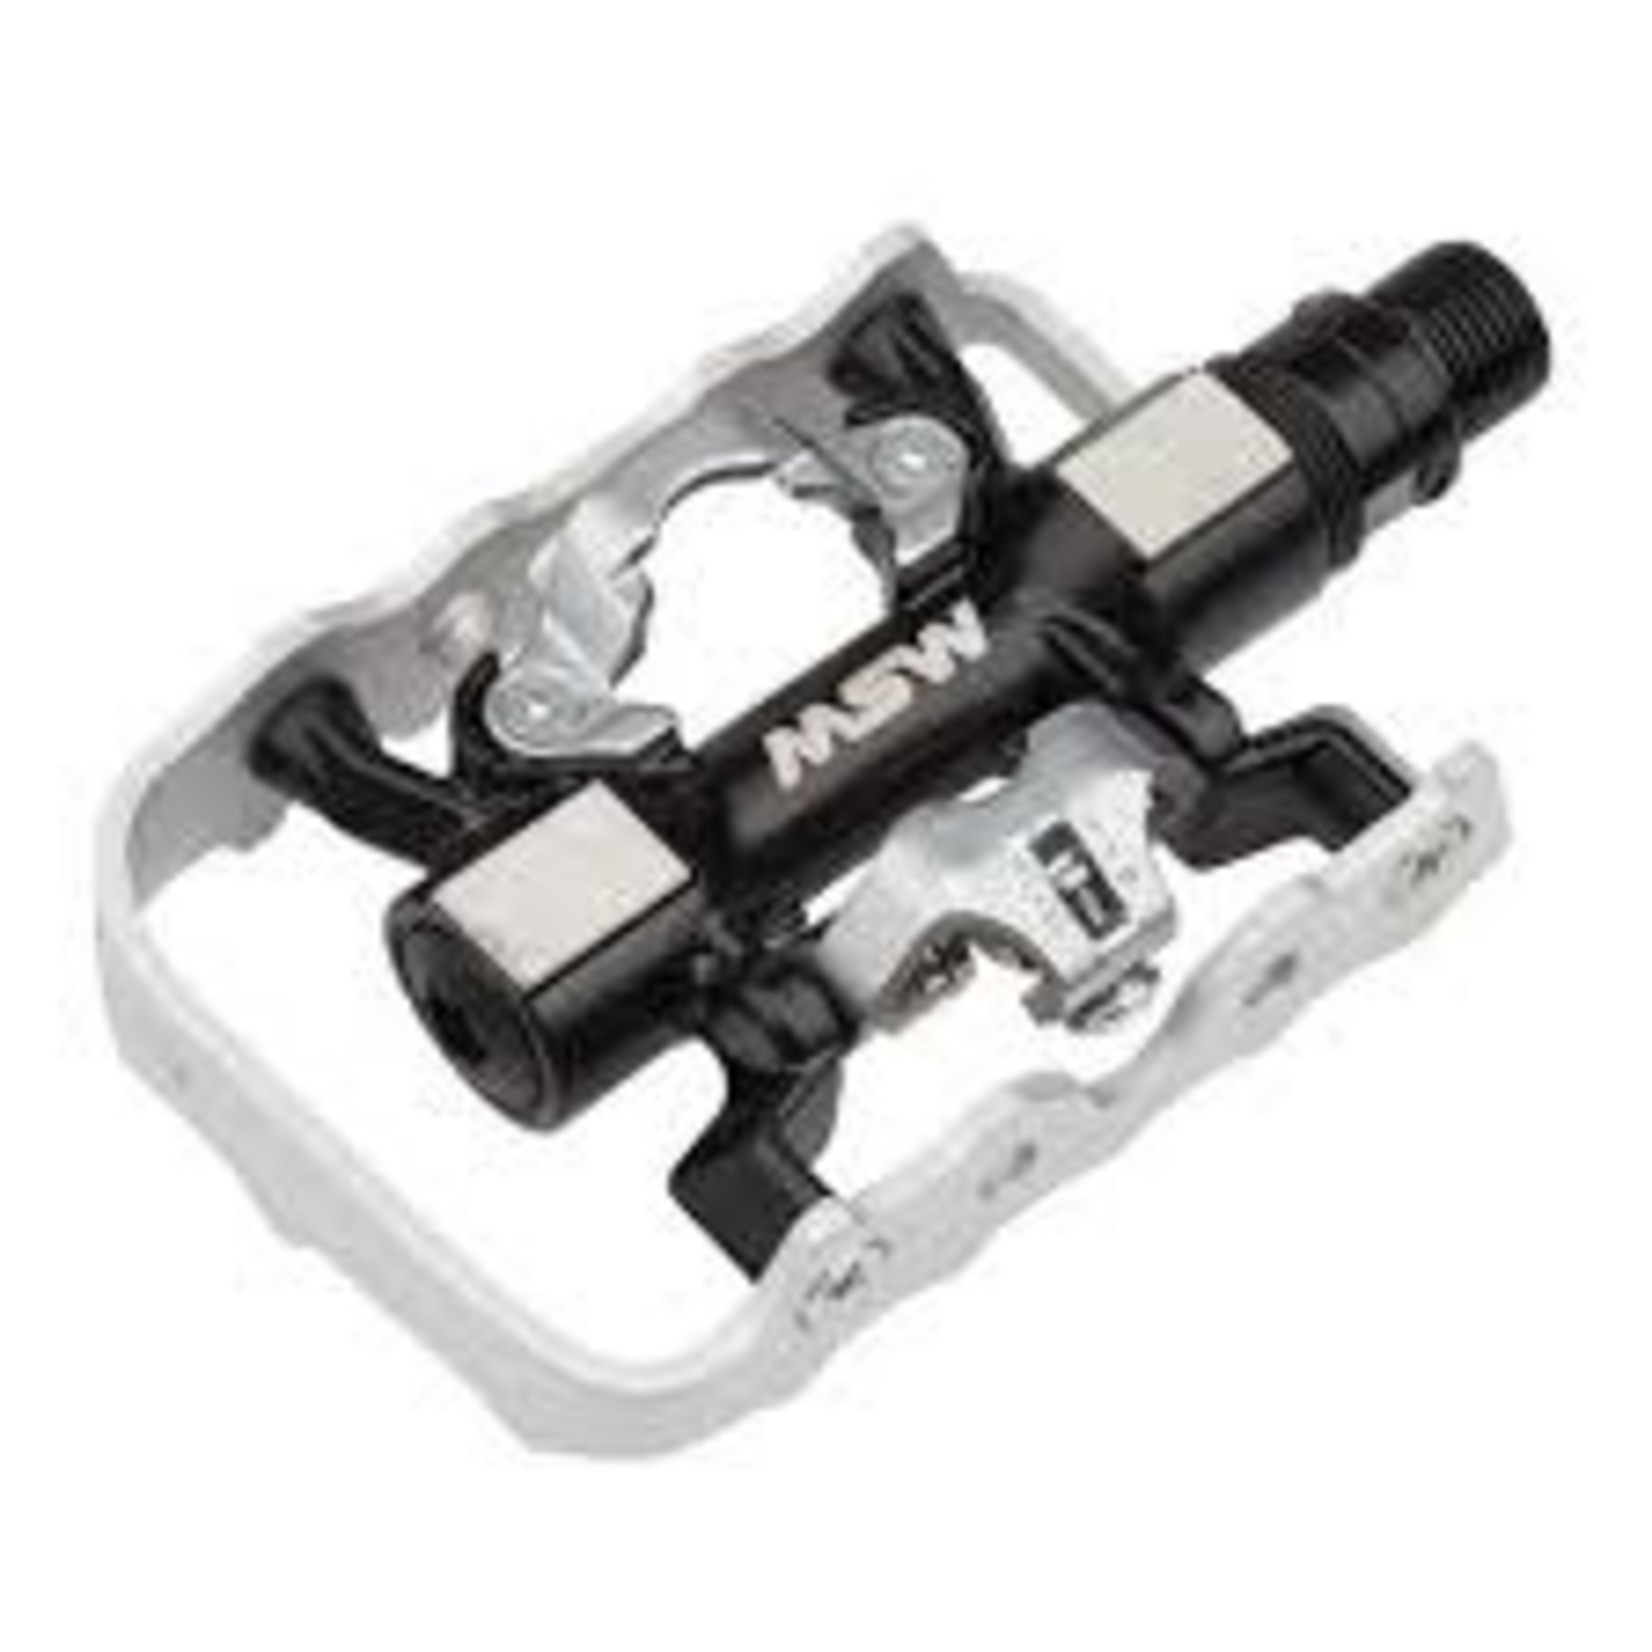 MSW Pedal MSW CP-200 Platform/Clipless Pedal Sealed Bearings Black/Silver